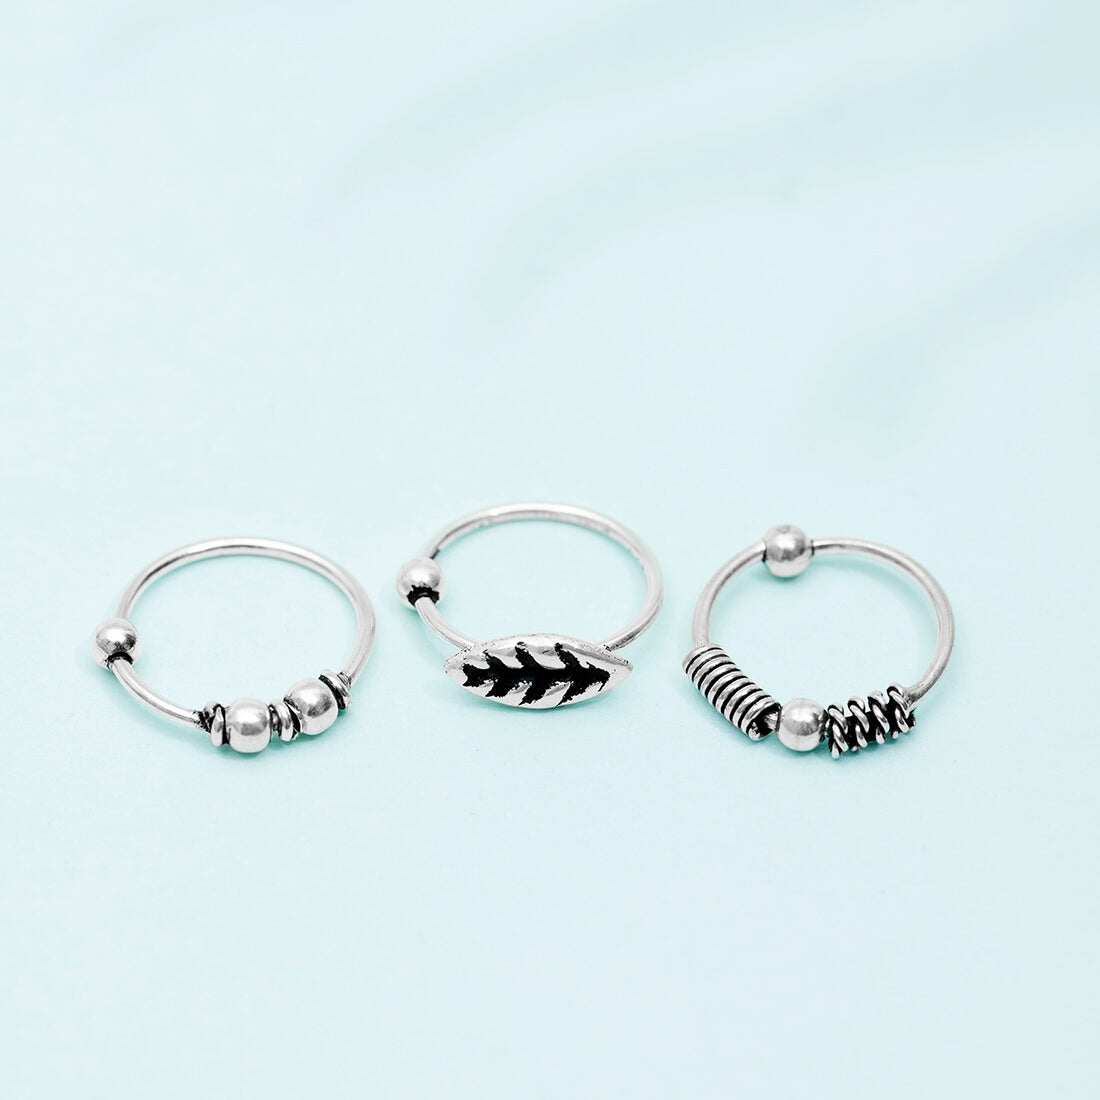 Oxidized 925 Silver Nose Ring Set